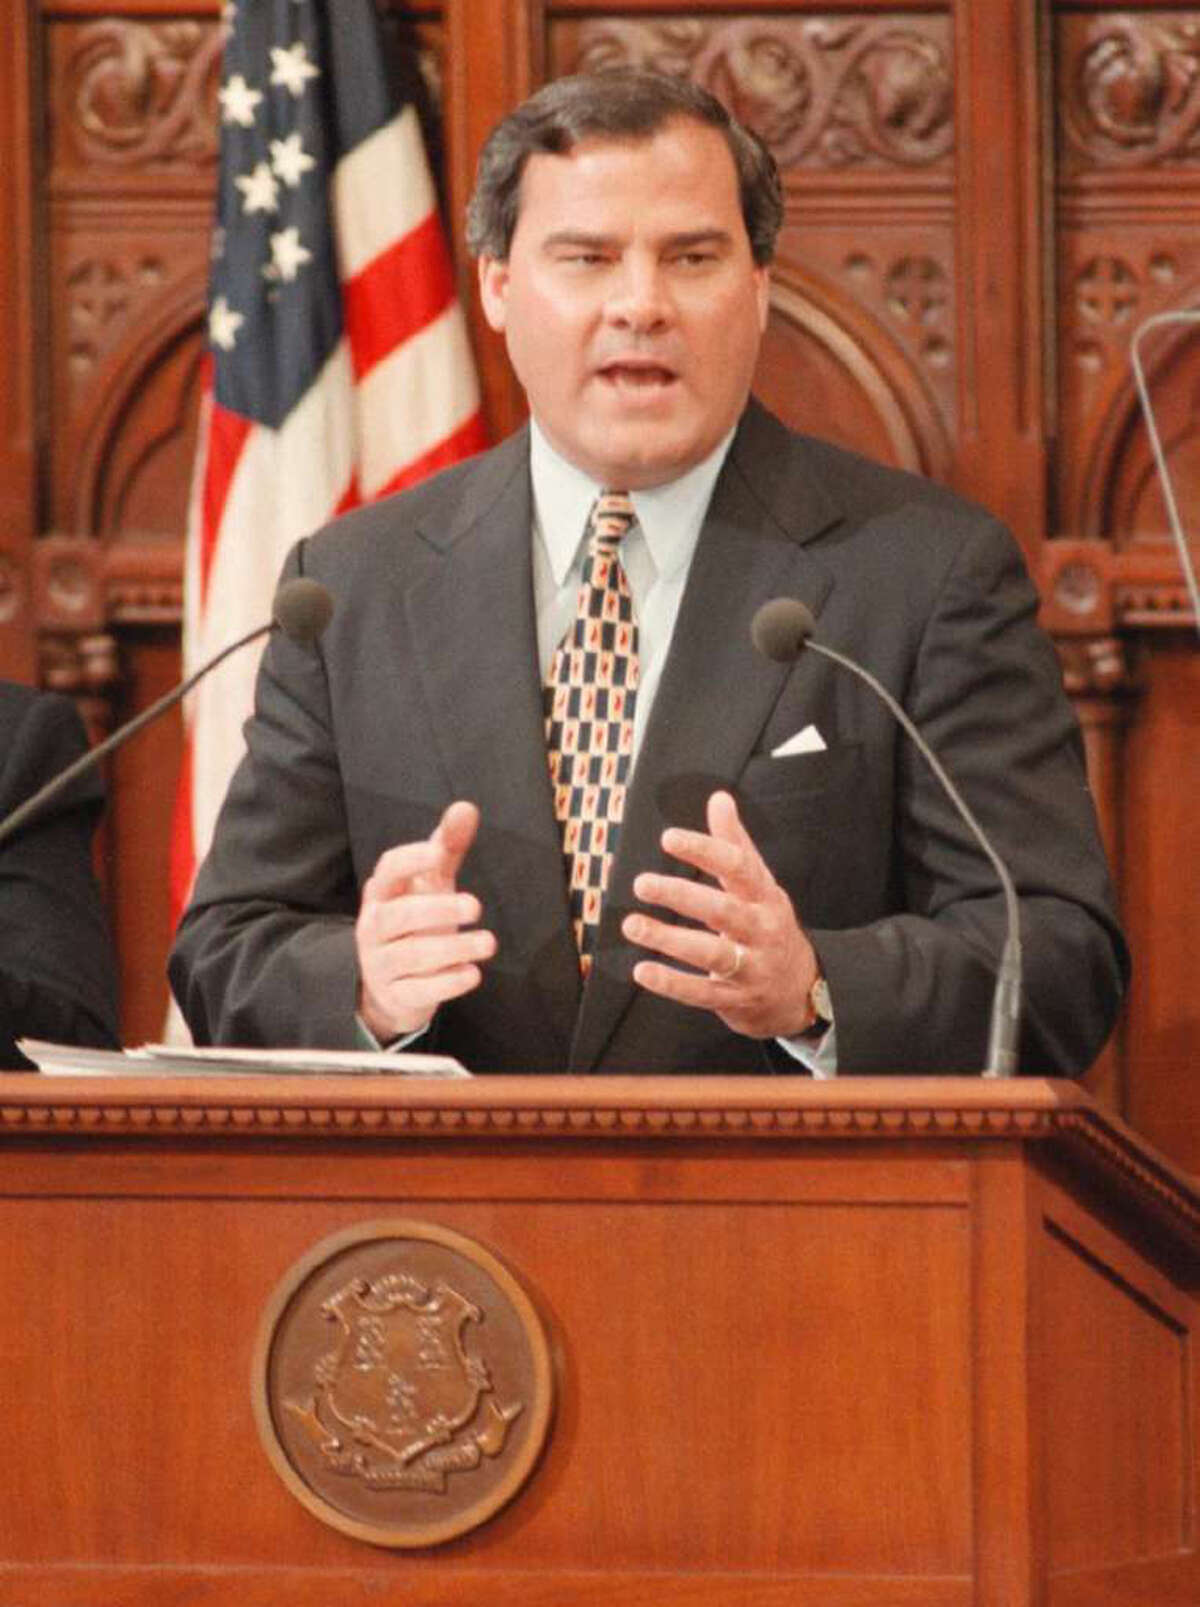 File 01/08/97: Governor John Rowland delivers his State of the State address to members of the state Legislators. Photo: File Photo/Erik Trautmann / File Photo